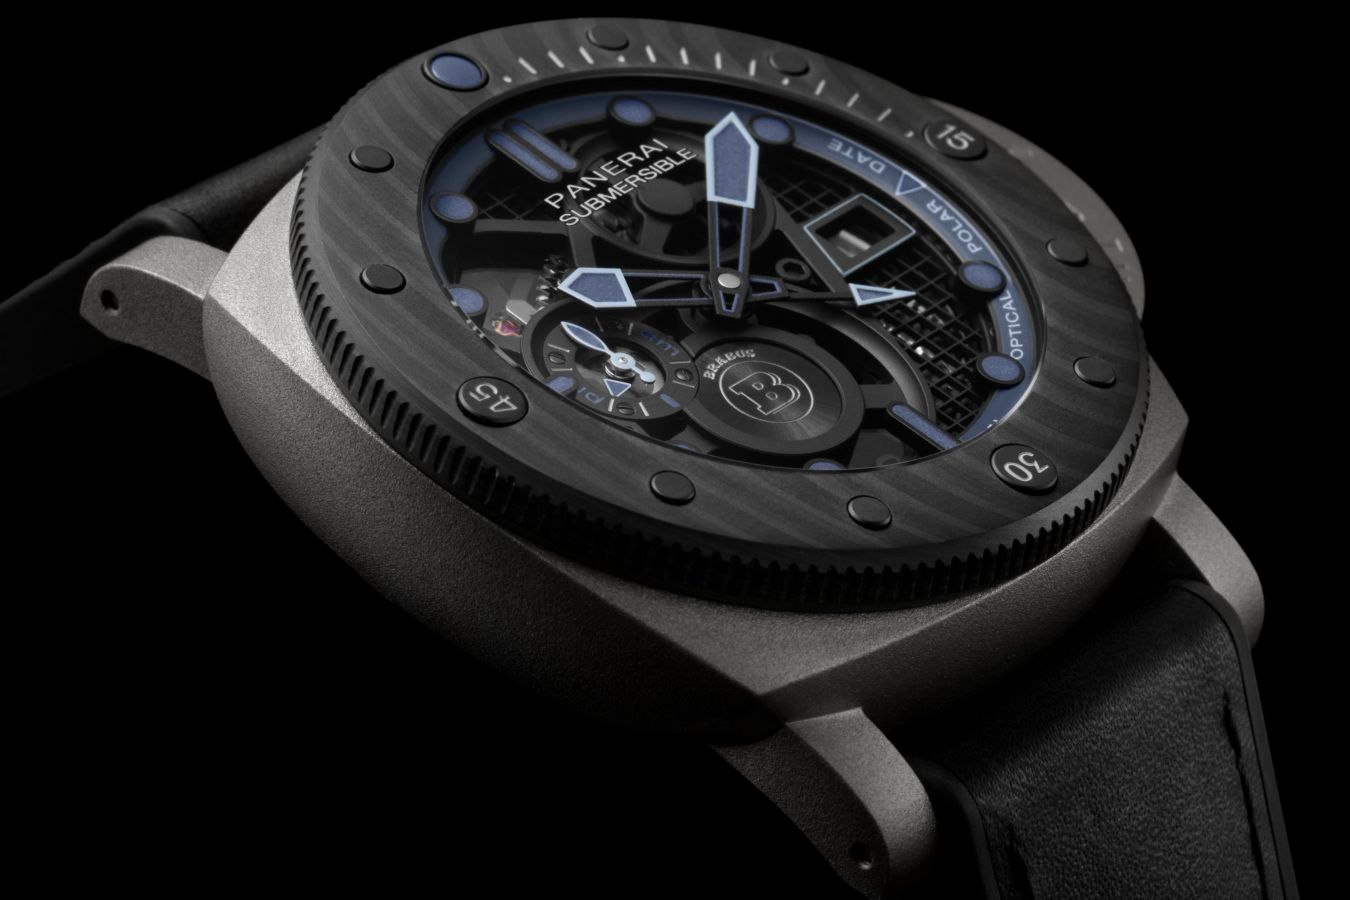 Quick-Take: The Panerai Submersible S Brabus Blue Shadow Edition